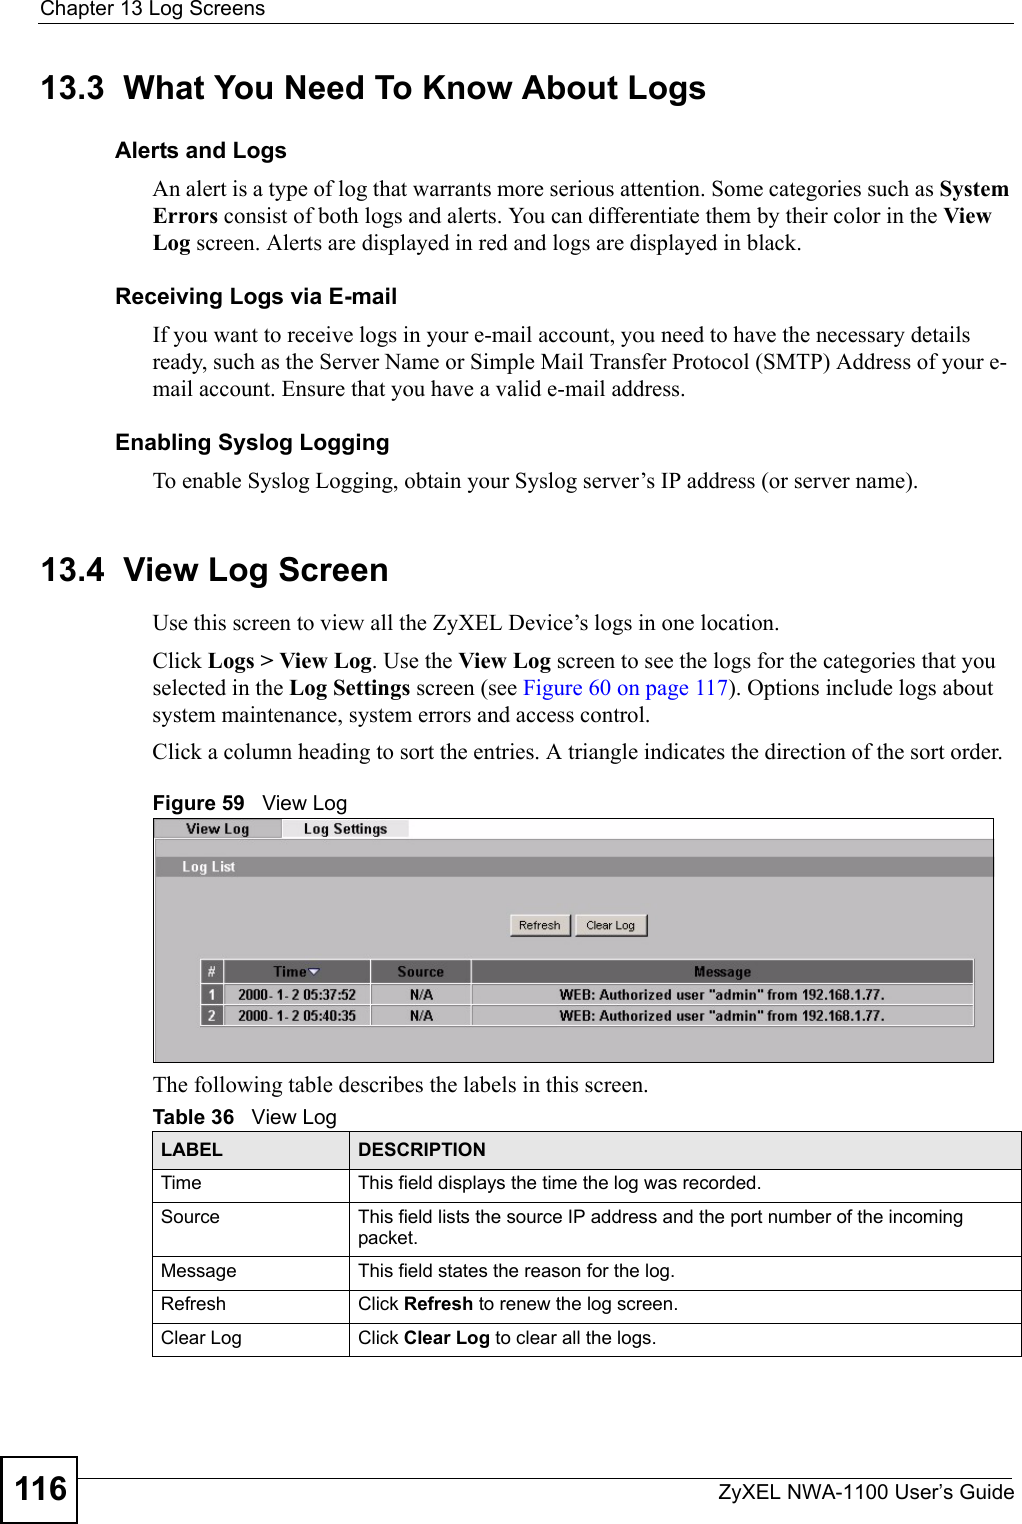 Chapter 13 Log ScreensZyXEL NWA-1100 User’s Guide11613.3  What You Need To Know About LogsAlerts and LogsAn alert is a type of log that warrants more serious attention. Some categories such as System Errors consist of both logs and alerts. You can differentiate them by their color in the View Log screen. Alerts are displayed in red and logs are displayed in black.Receiving Logs via E-mailIf you want to receive logs in your e-mail account, you need to have the necessary details ready, such as the Server Name or Simple Mail Transfer Protocol (SMTP) Address of your e-mail account. Ensure that you have a valid e-mail address.Enabling Syslog LoggingTo enable Syslog Logging, obtain your Syslog server’s IP address (or server name).13.4  View Log ScreenUse this screen to view all the ZyXEL Device’s logs in one location. Click Logs &gt; View Log. Use the View Log screen to see the logs for the categories that you selected in the Log Settings screen (see Figure 60 on page 117). Options include logs about system maintenance, system errors and access control.Click a column heading to sort the entries. A triangle indicates the direction of the sort order. Figure 59   View LogThe following table describes the labels in this screen.Table 36   View LogLABEL DESCRIPTIONTime  This field displays the time the log was recorded.Source This field lists the source IP address and the port number of the incoming packet.Message This field states the reason for the log.Refresh Click Refresh to renew the log screen. Clear Log  Click Clear Log to clear all the logs. 